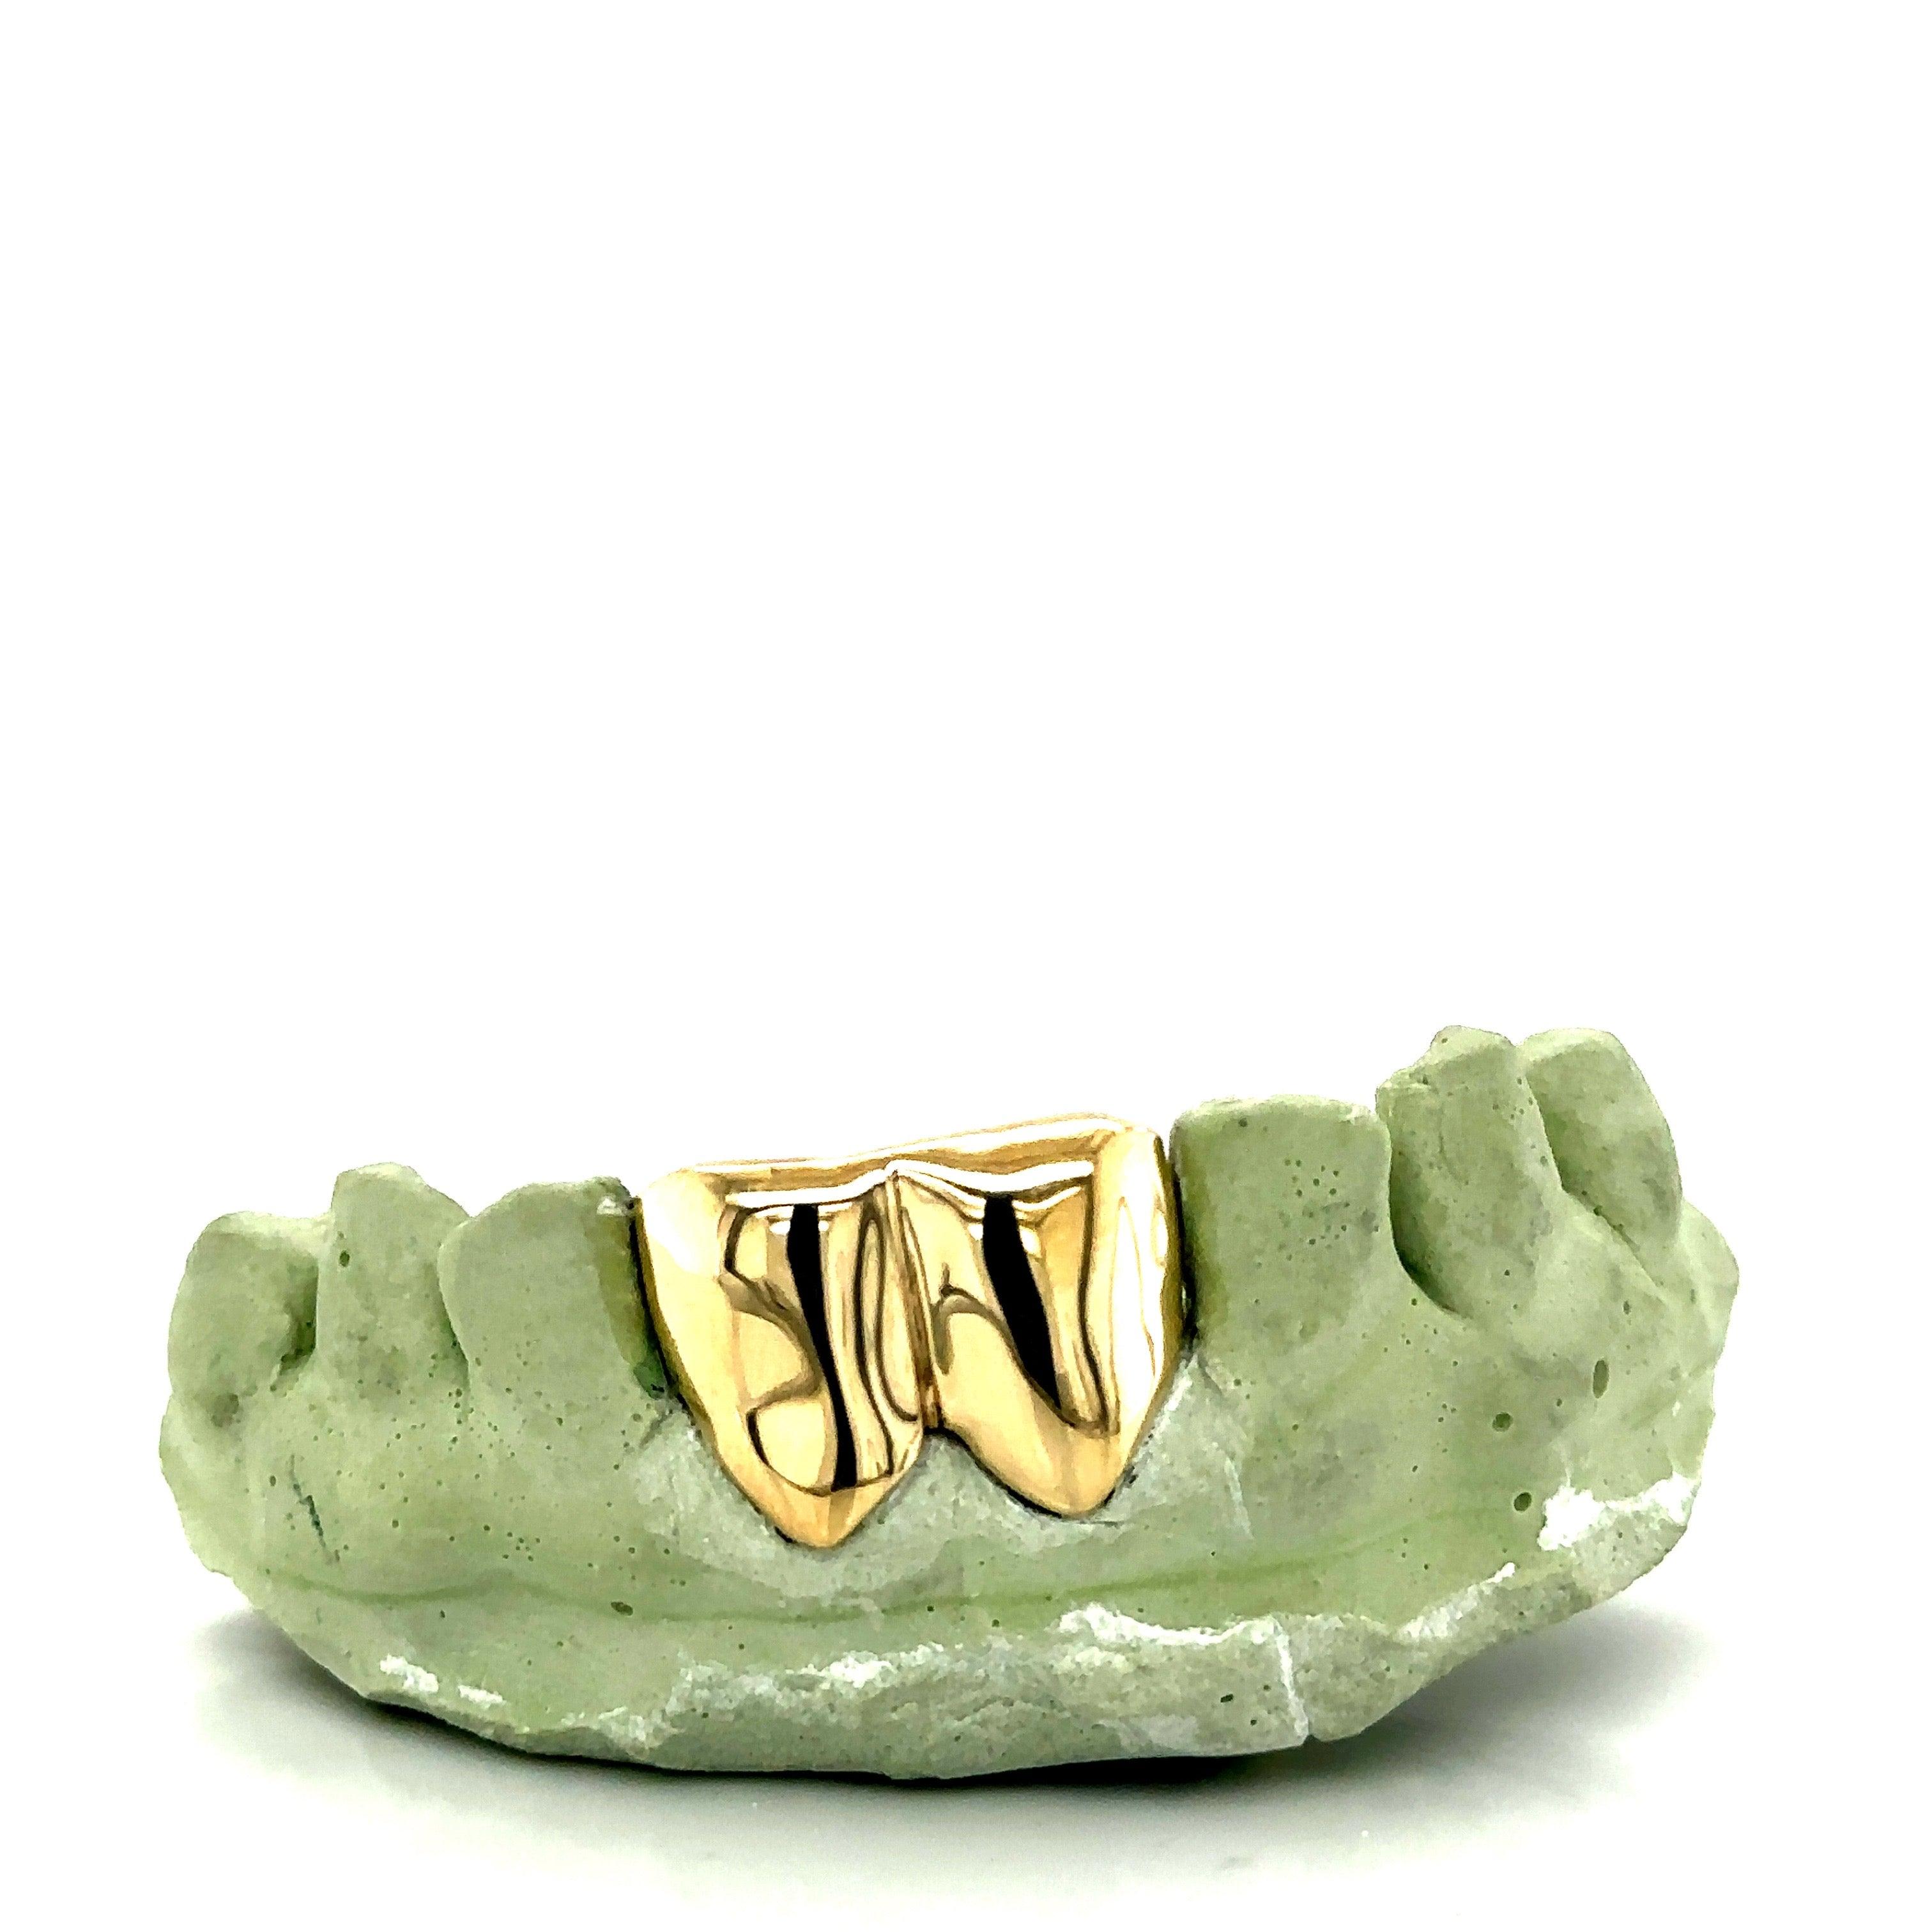 2pc Gold Front Teeth Grillz - Seattle Gold Grillz